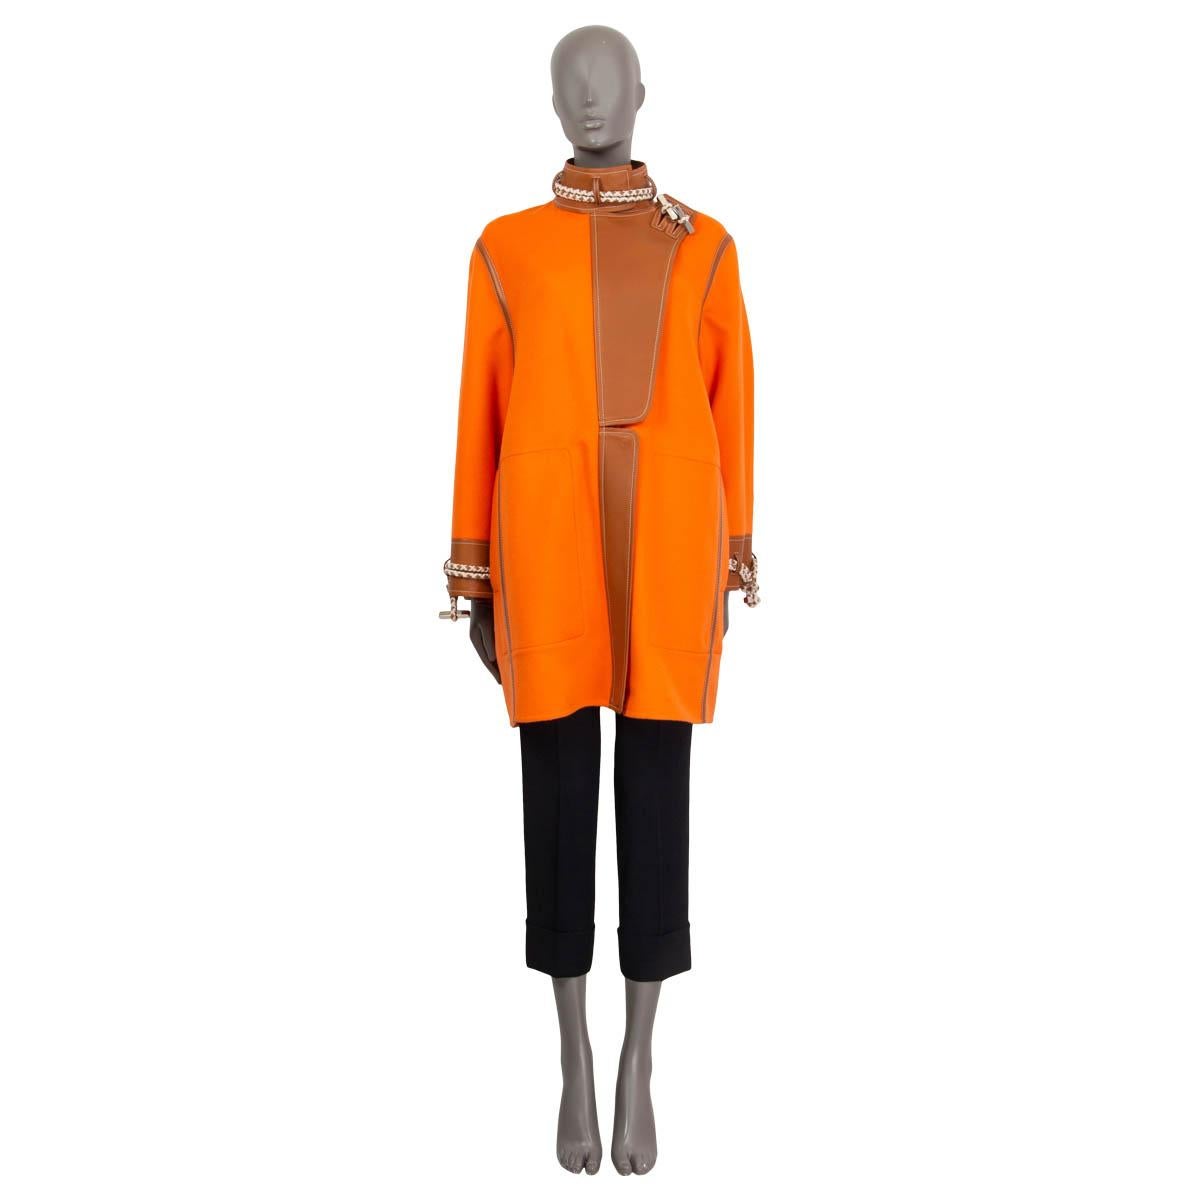 100% authentic Hermès Spring/Summer 2019 cashmere coat in orange and camel cashmere (100%). Features cord and lambskin leather (100%) embellishments at the neck, the trim and the cuffs. Opens with two toggles, a concealed zipper and three push